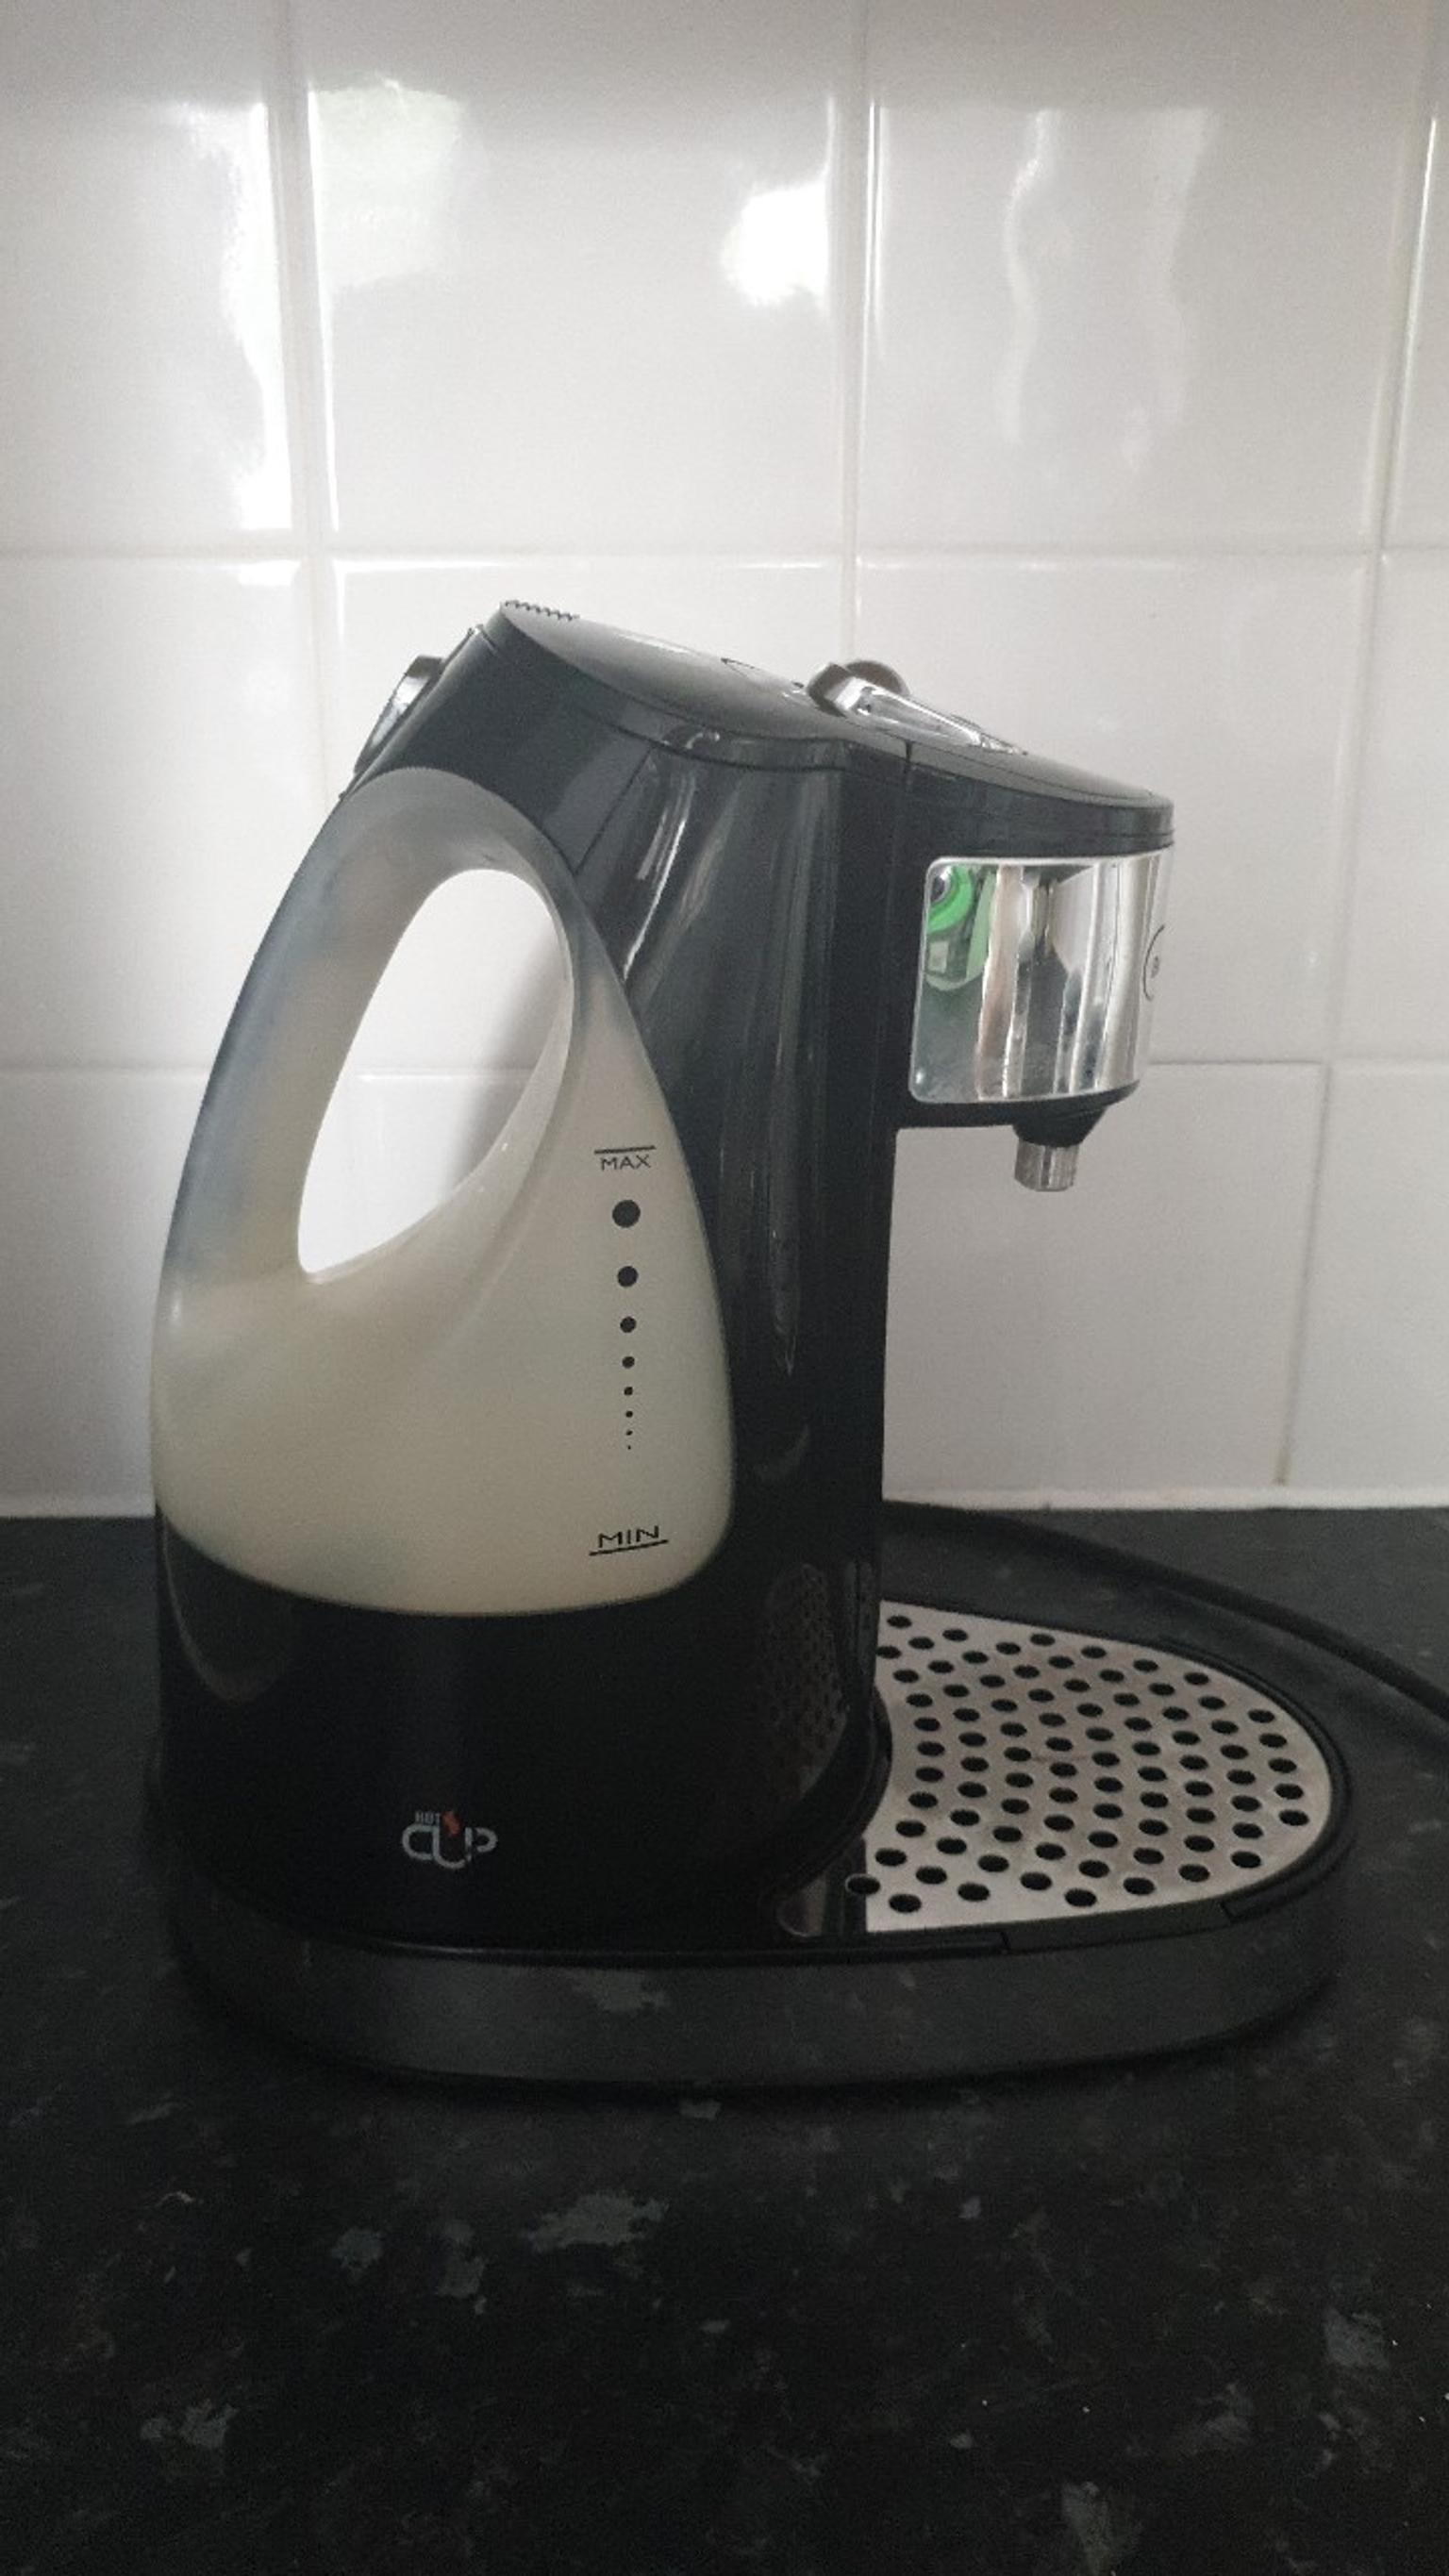 instant kettle